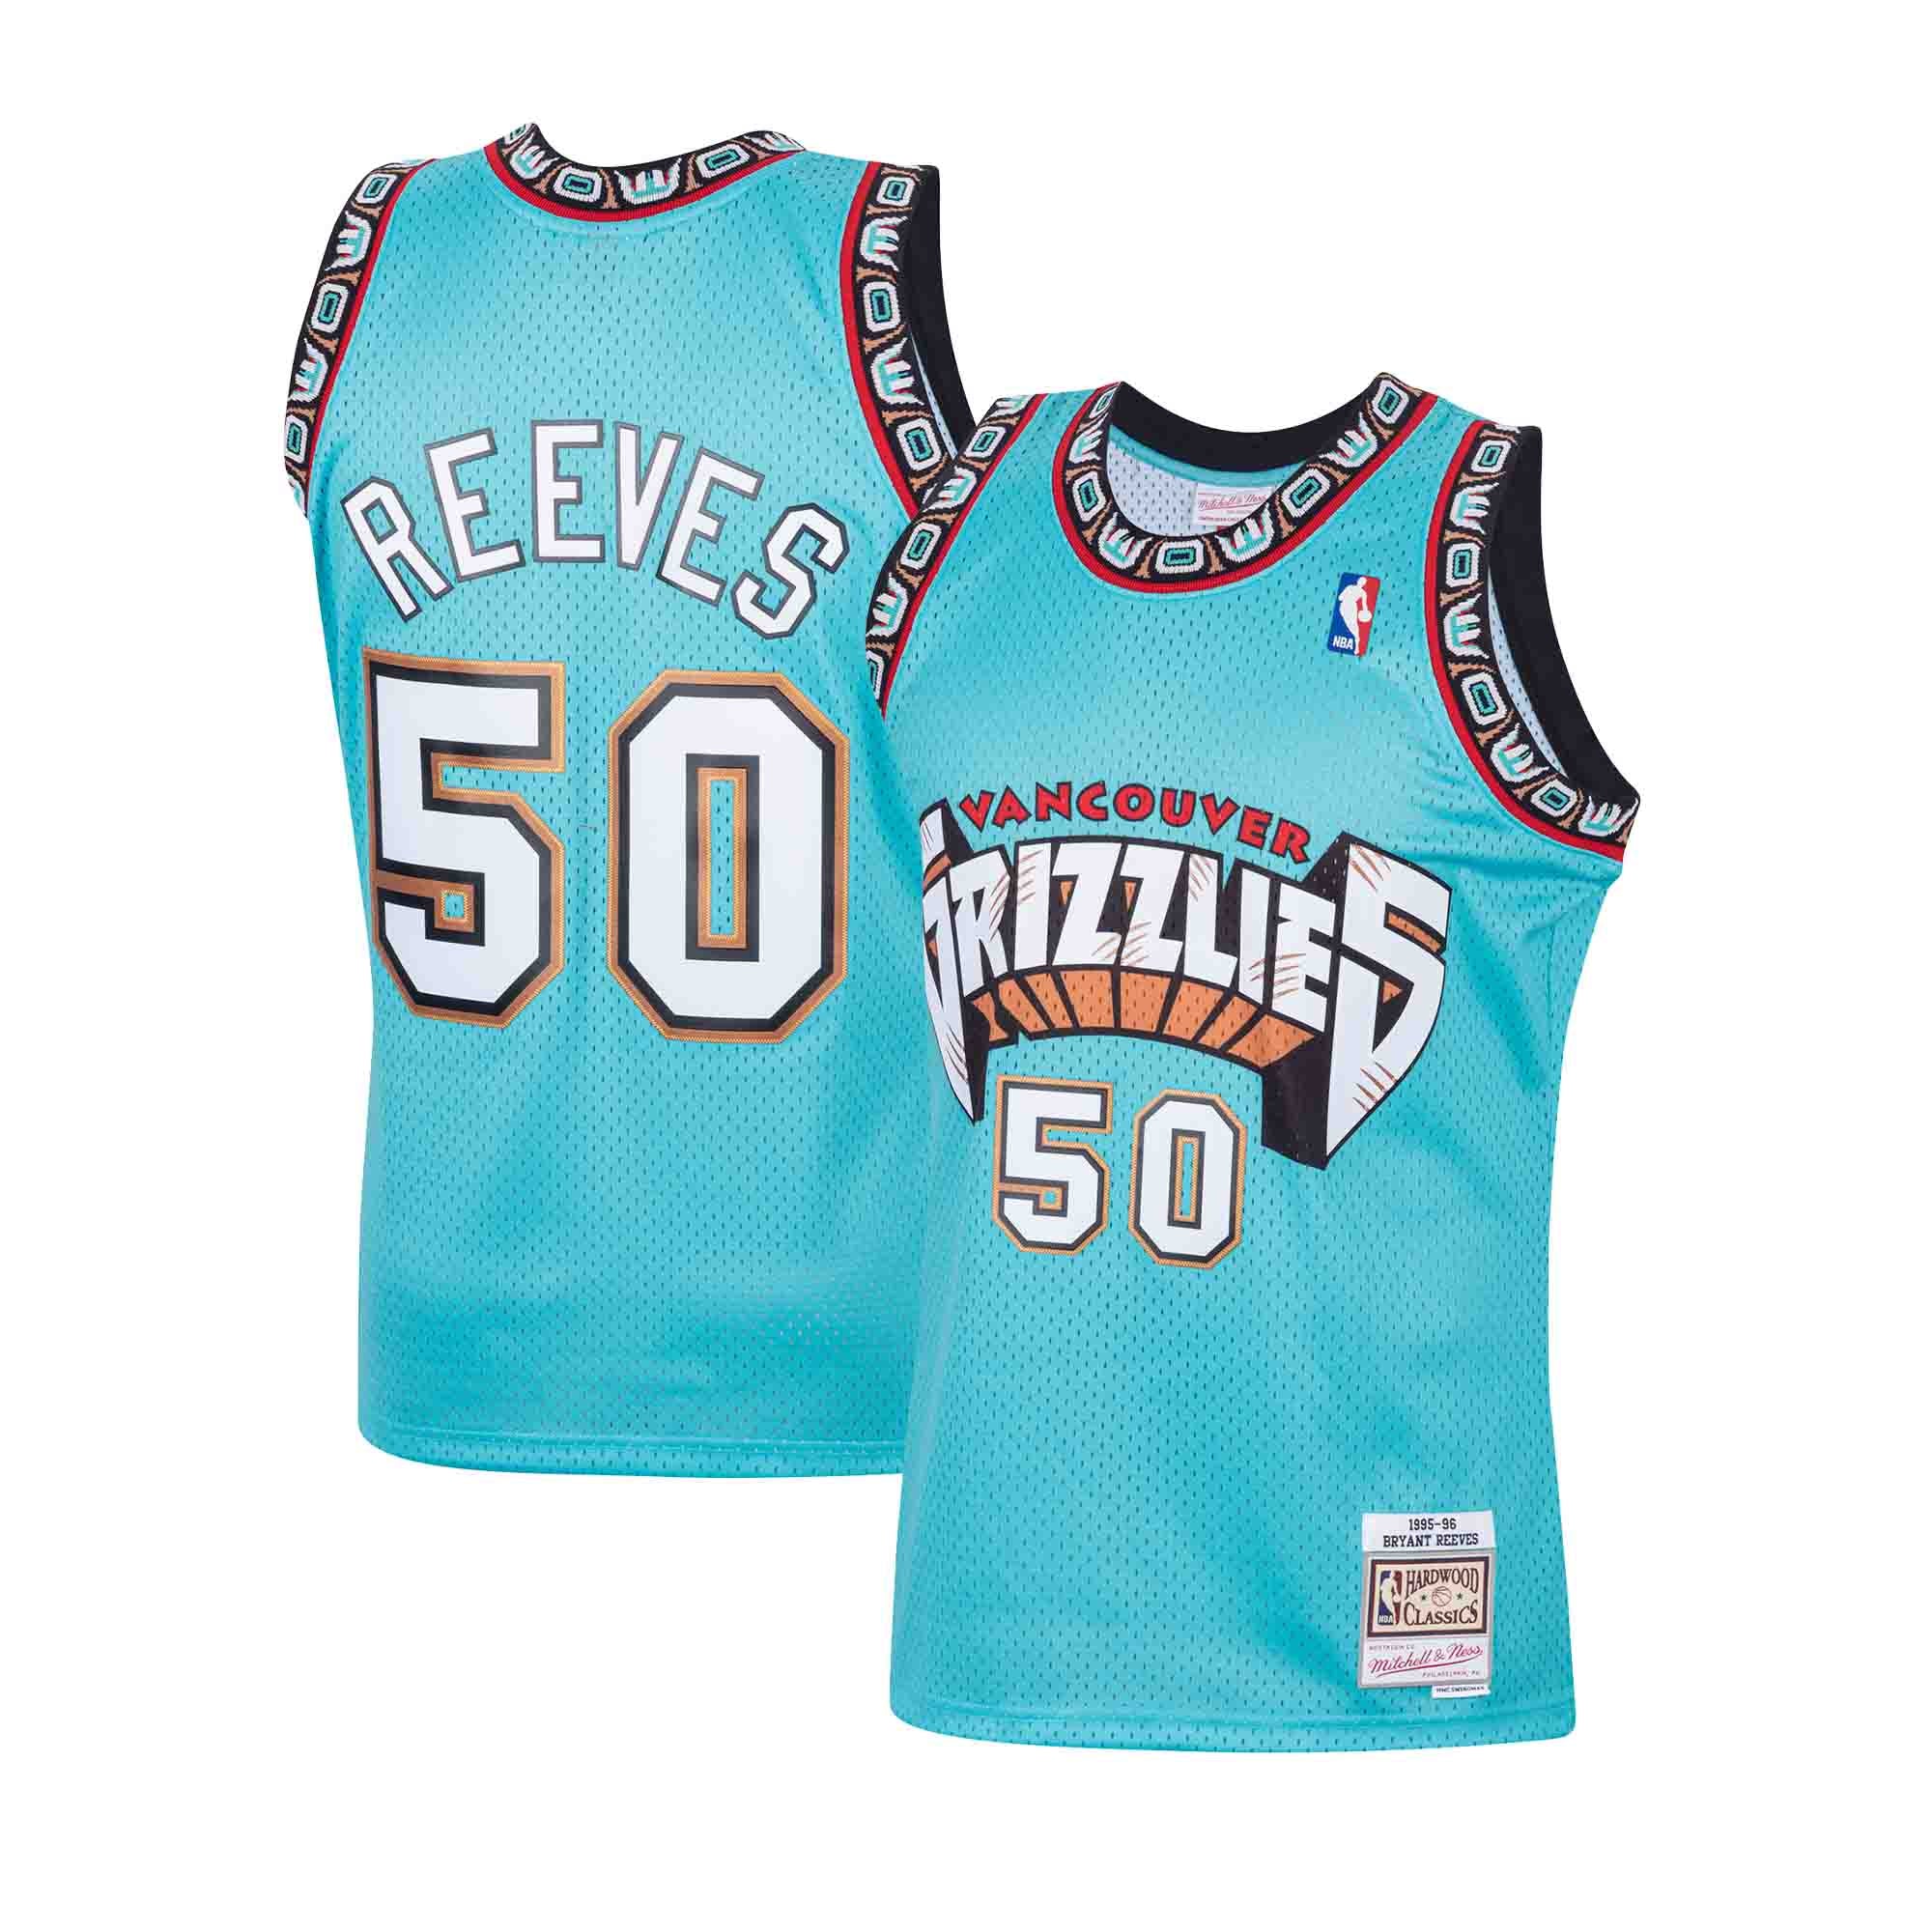 Mike Bibby Vancouver Grizzlies Mitchell & Ness Hardwood Classics 1998/99  Lunar New Year Swingman Jersey - Turquoise